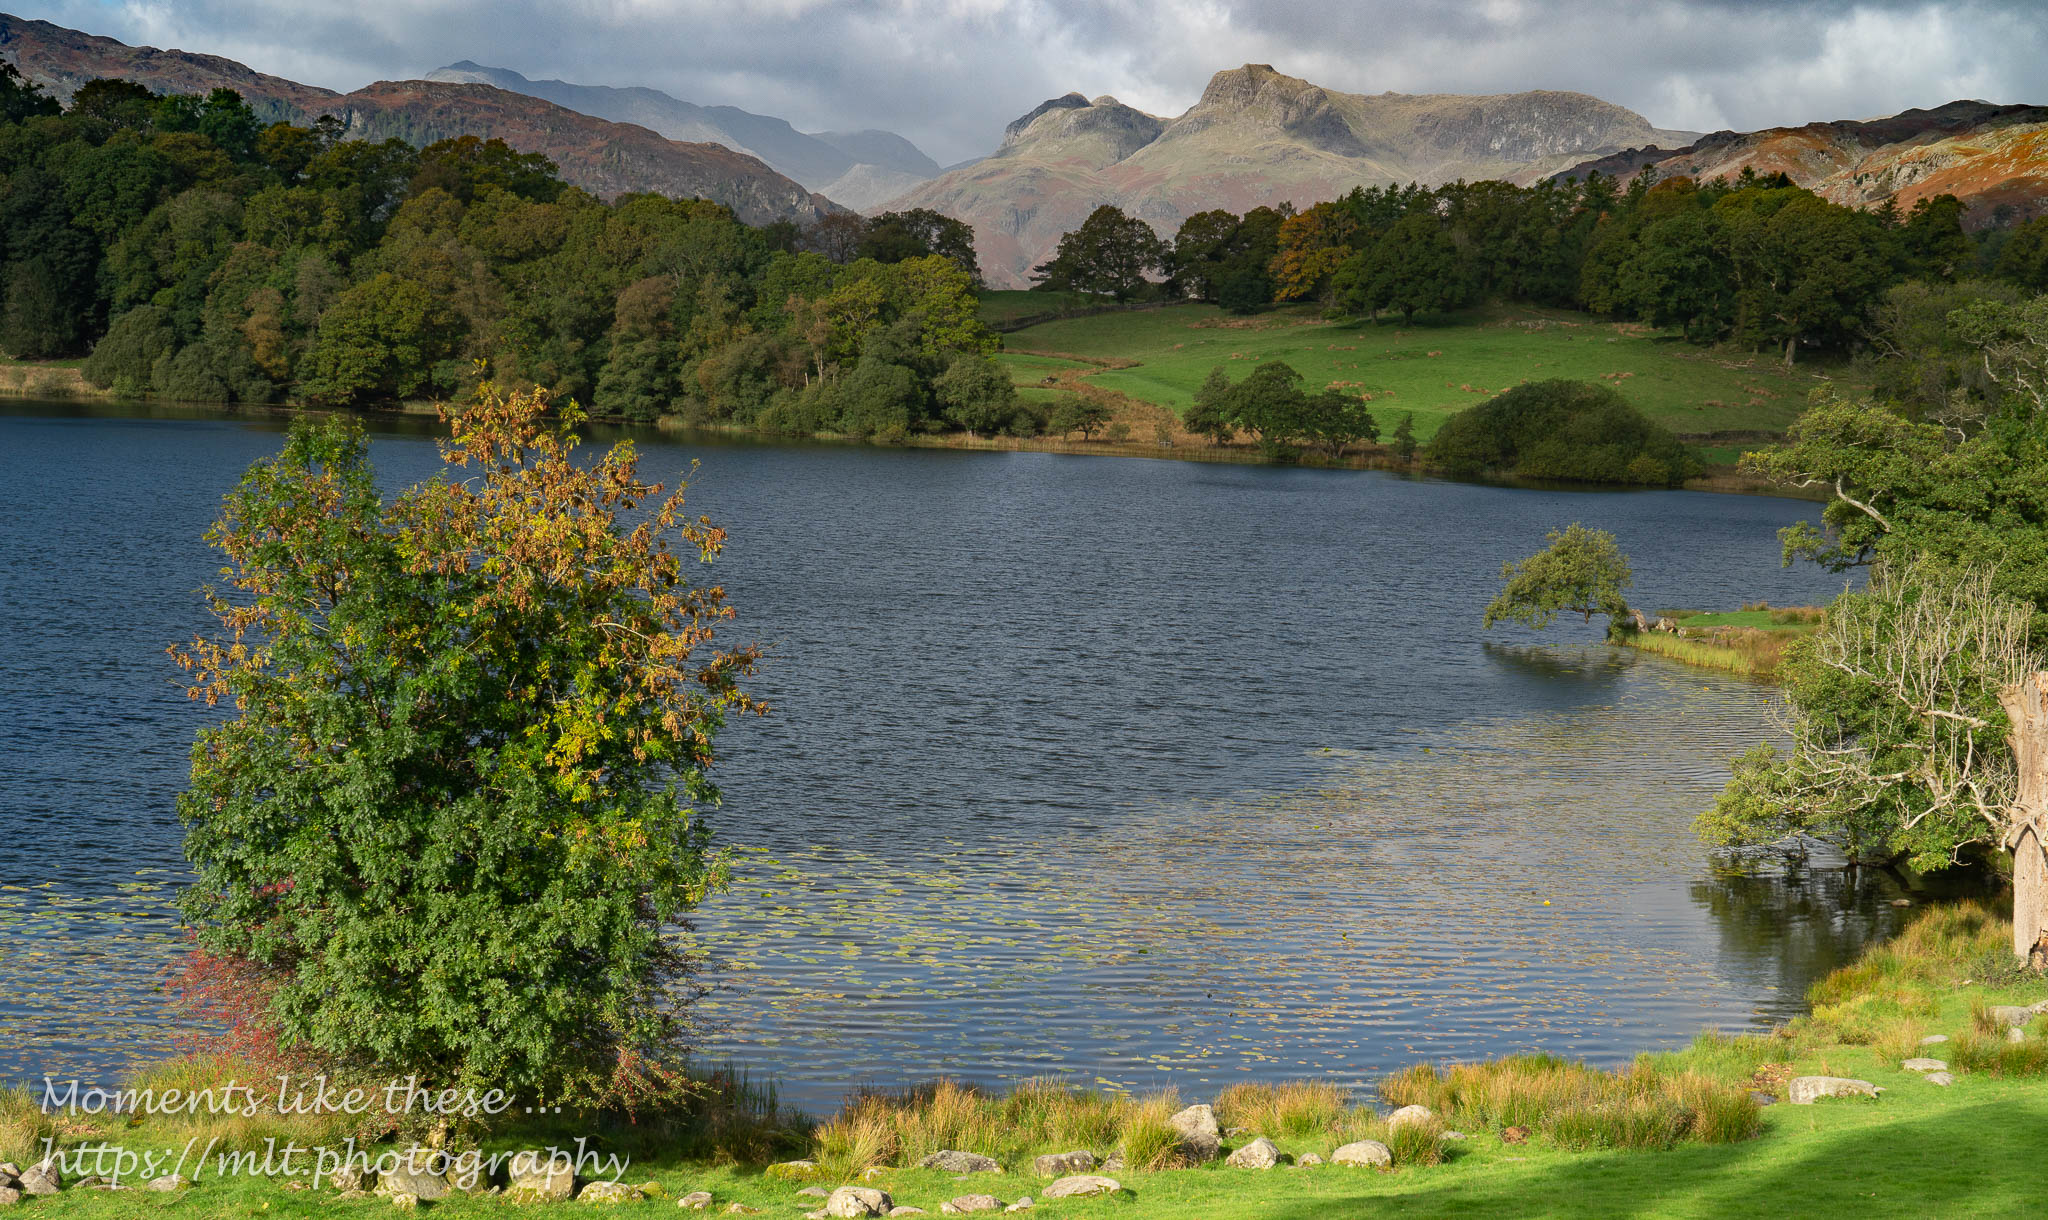 Loughrigg Tarn and Langdale Pikes